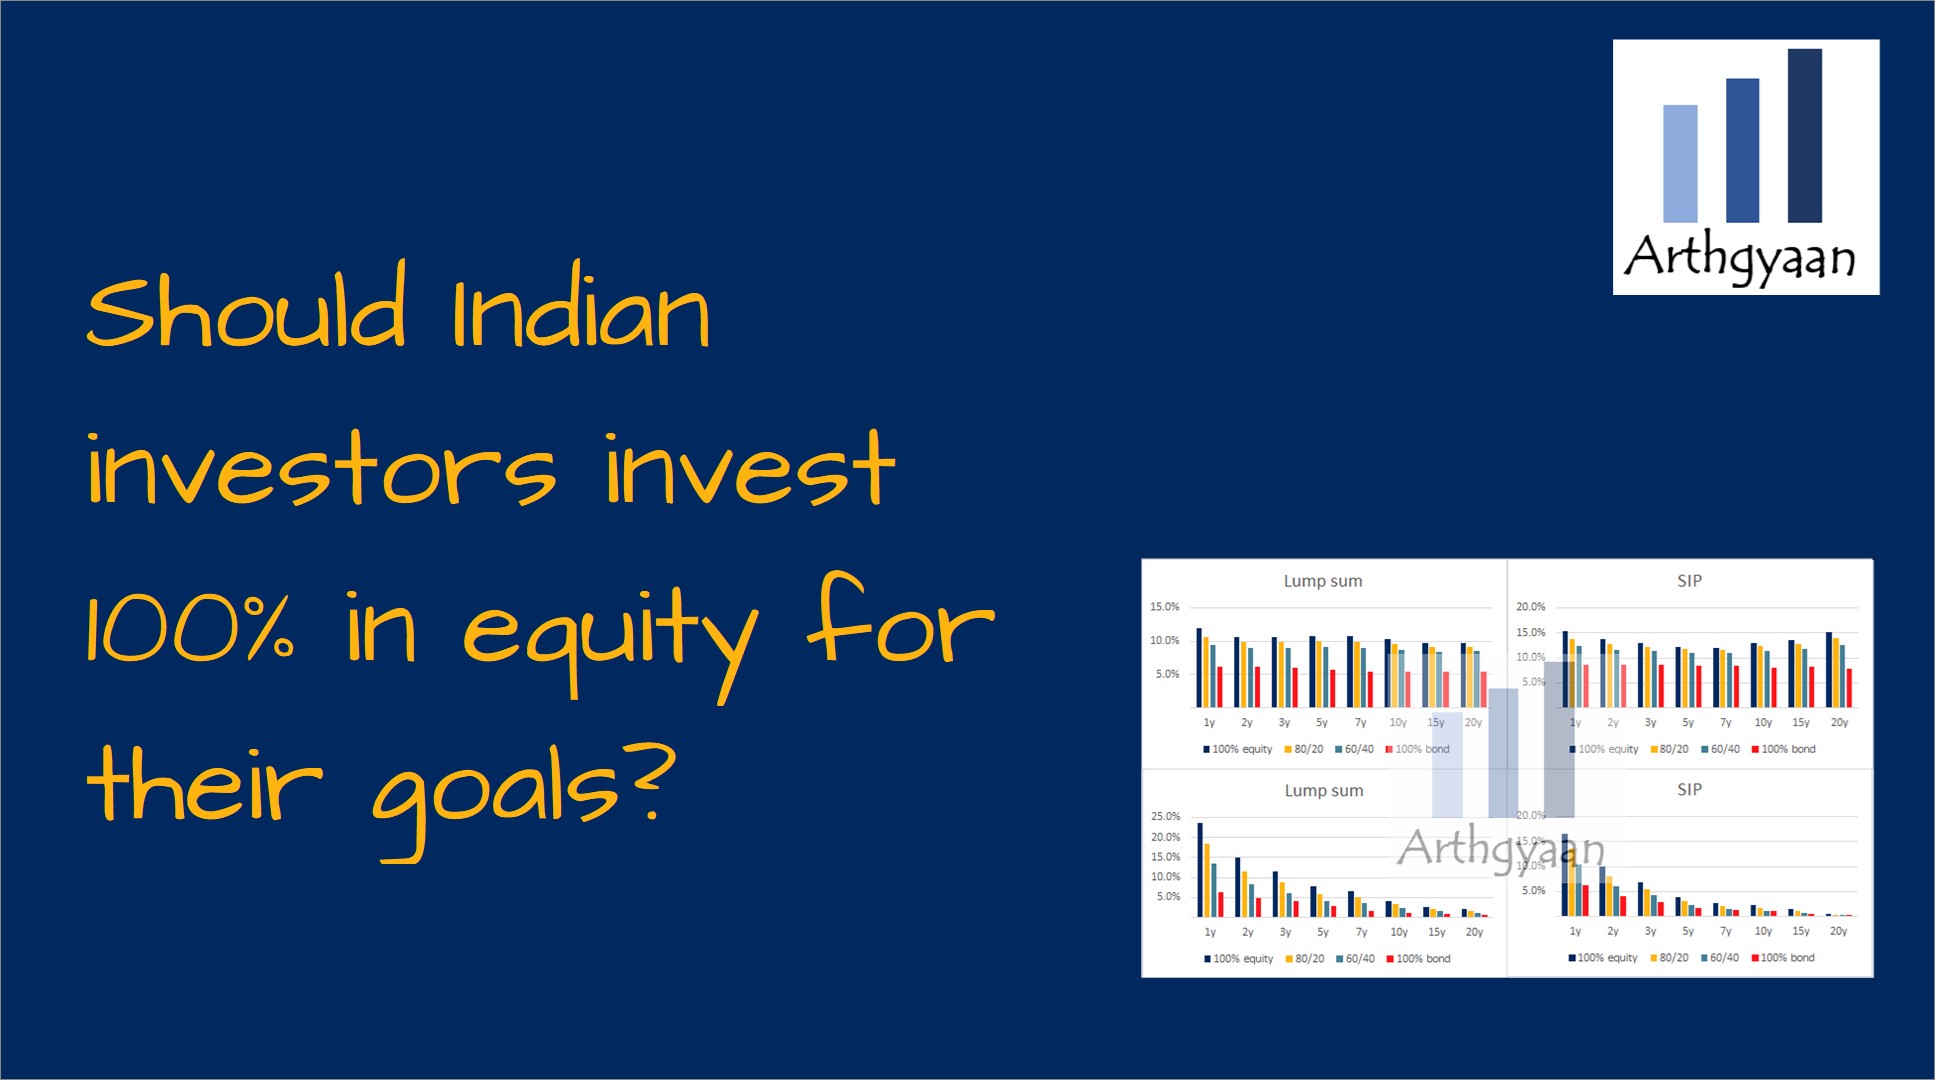 Should Indian investors invest 100% in equity for their goals?